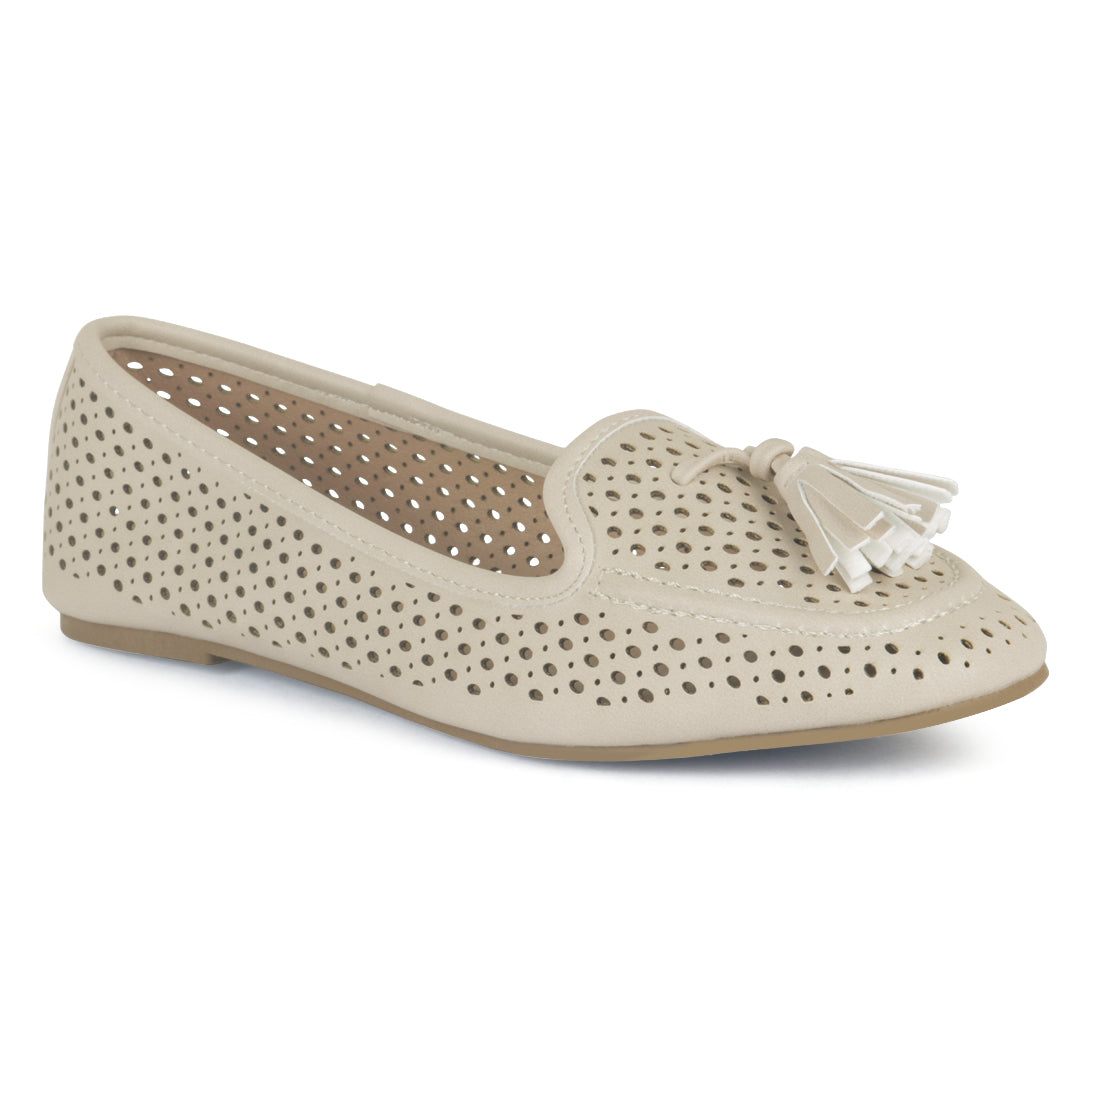 Nude Perforated Microfiber Loafer - Nude